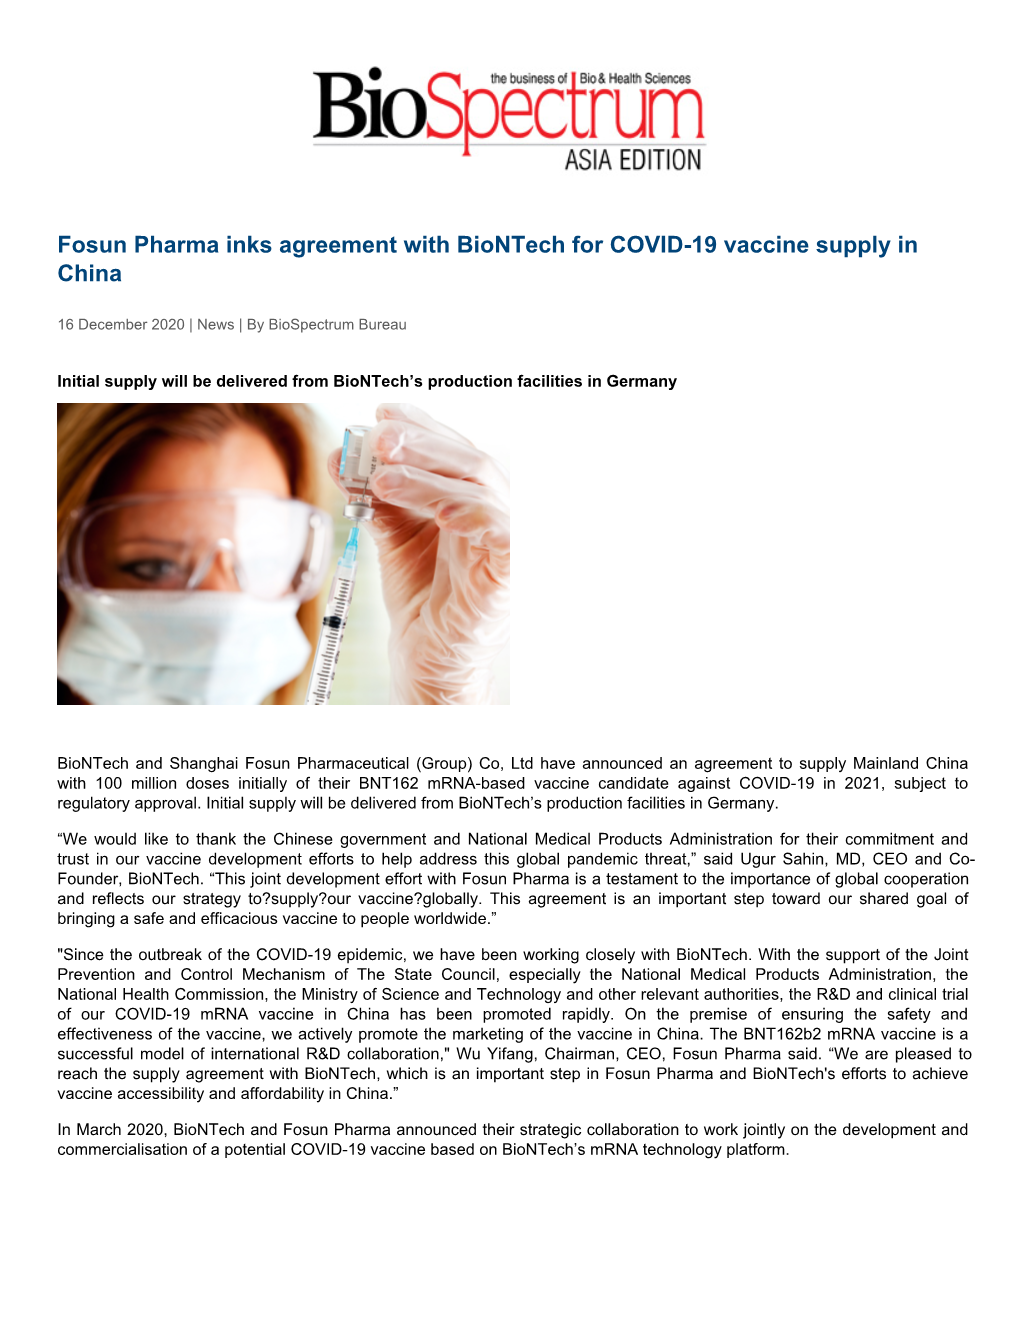 Fosun Pharma Inks Agreement with Biontech for COVID-19 Vaccine Supply in China